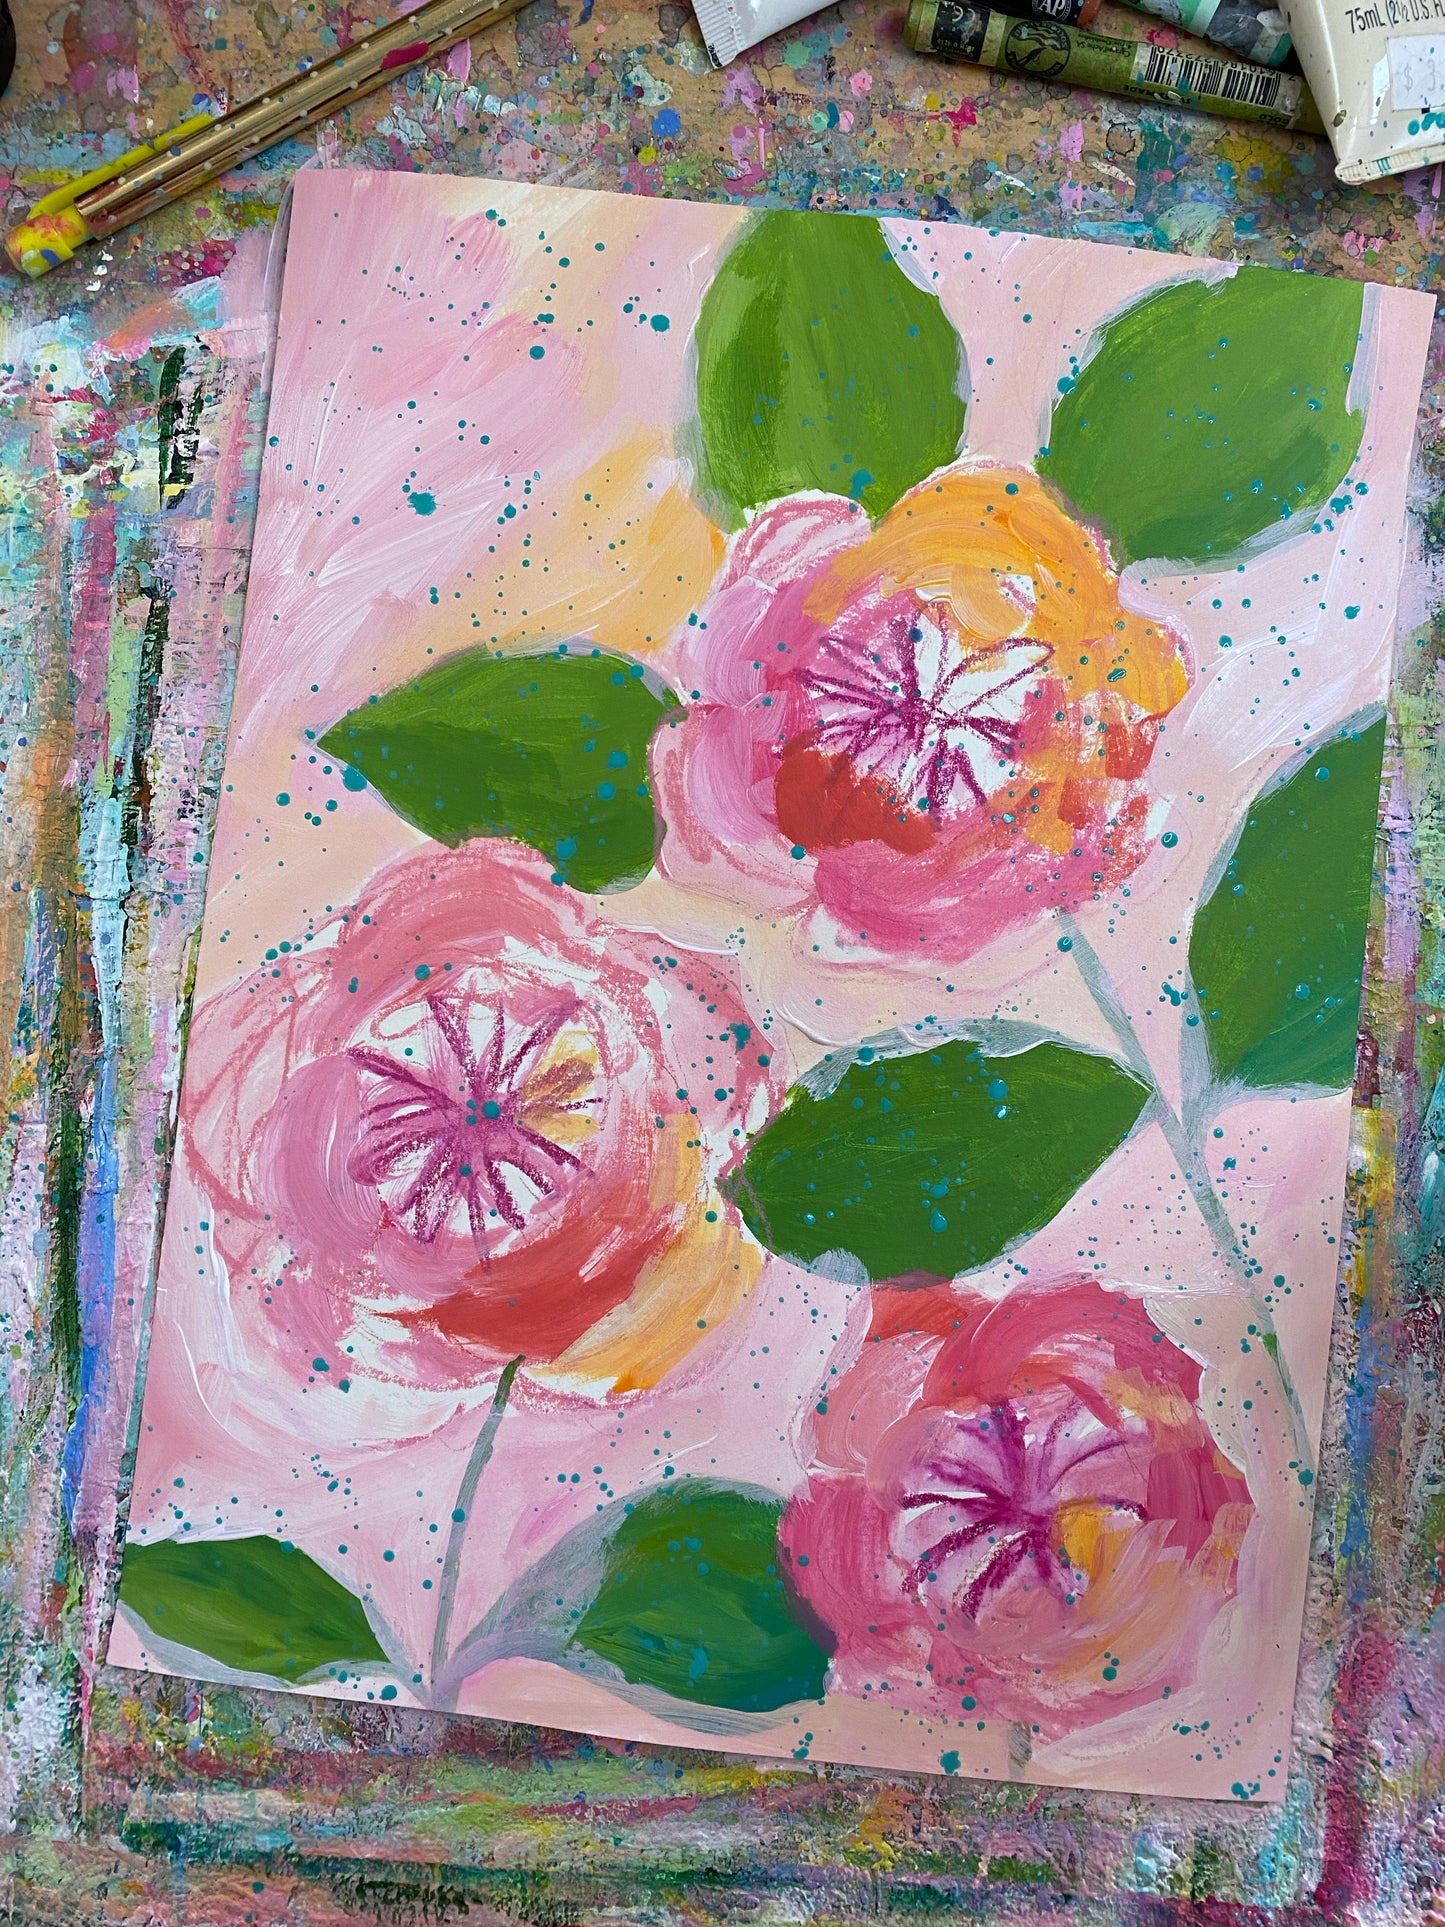 February Flowers Day 22 Garden Rose 8.5x11 inch original painting